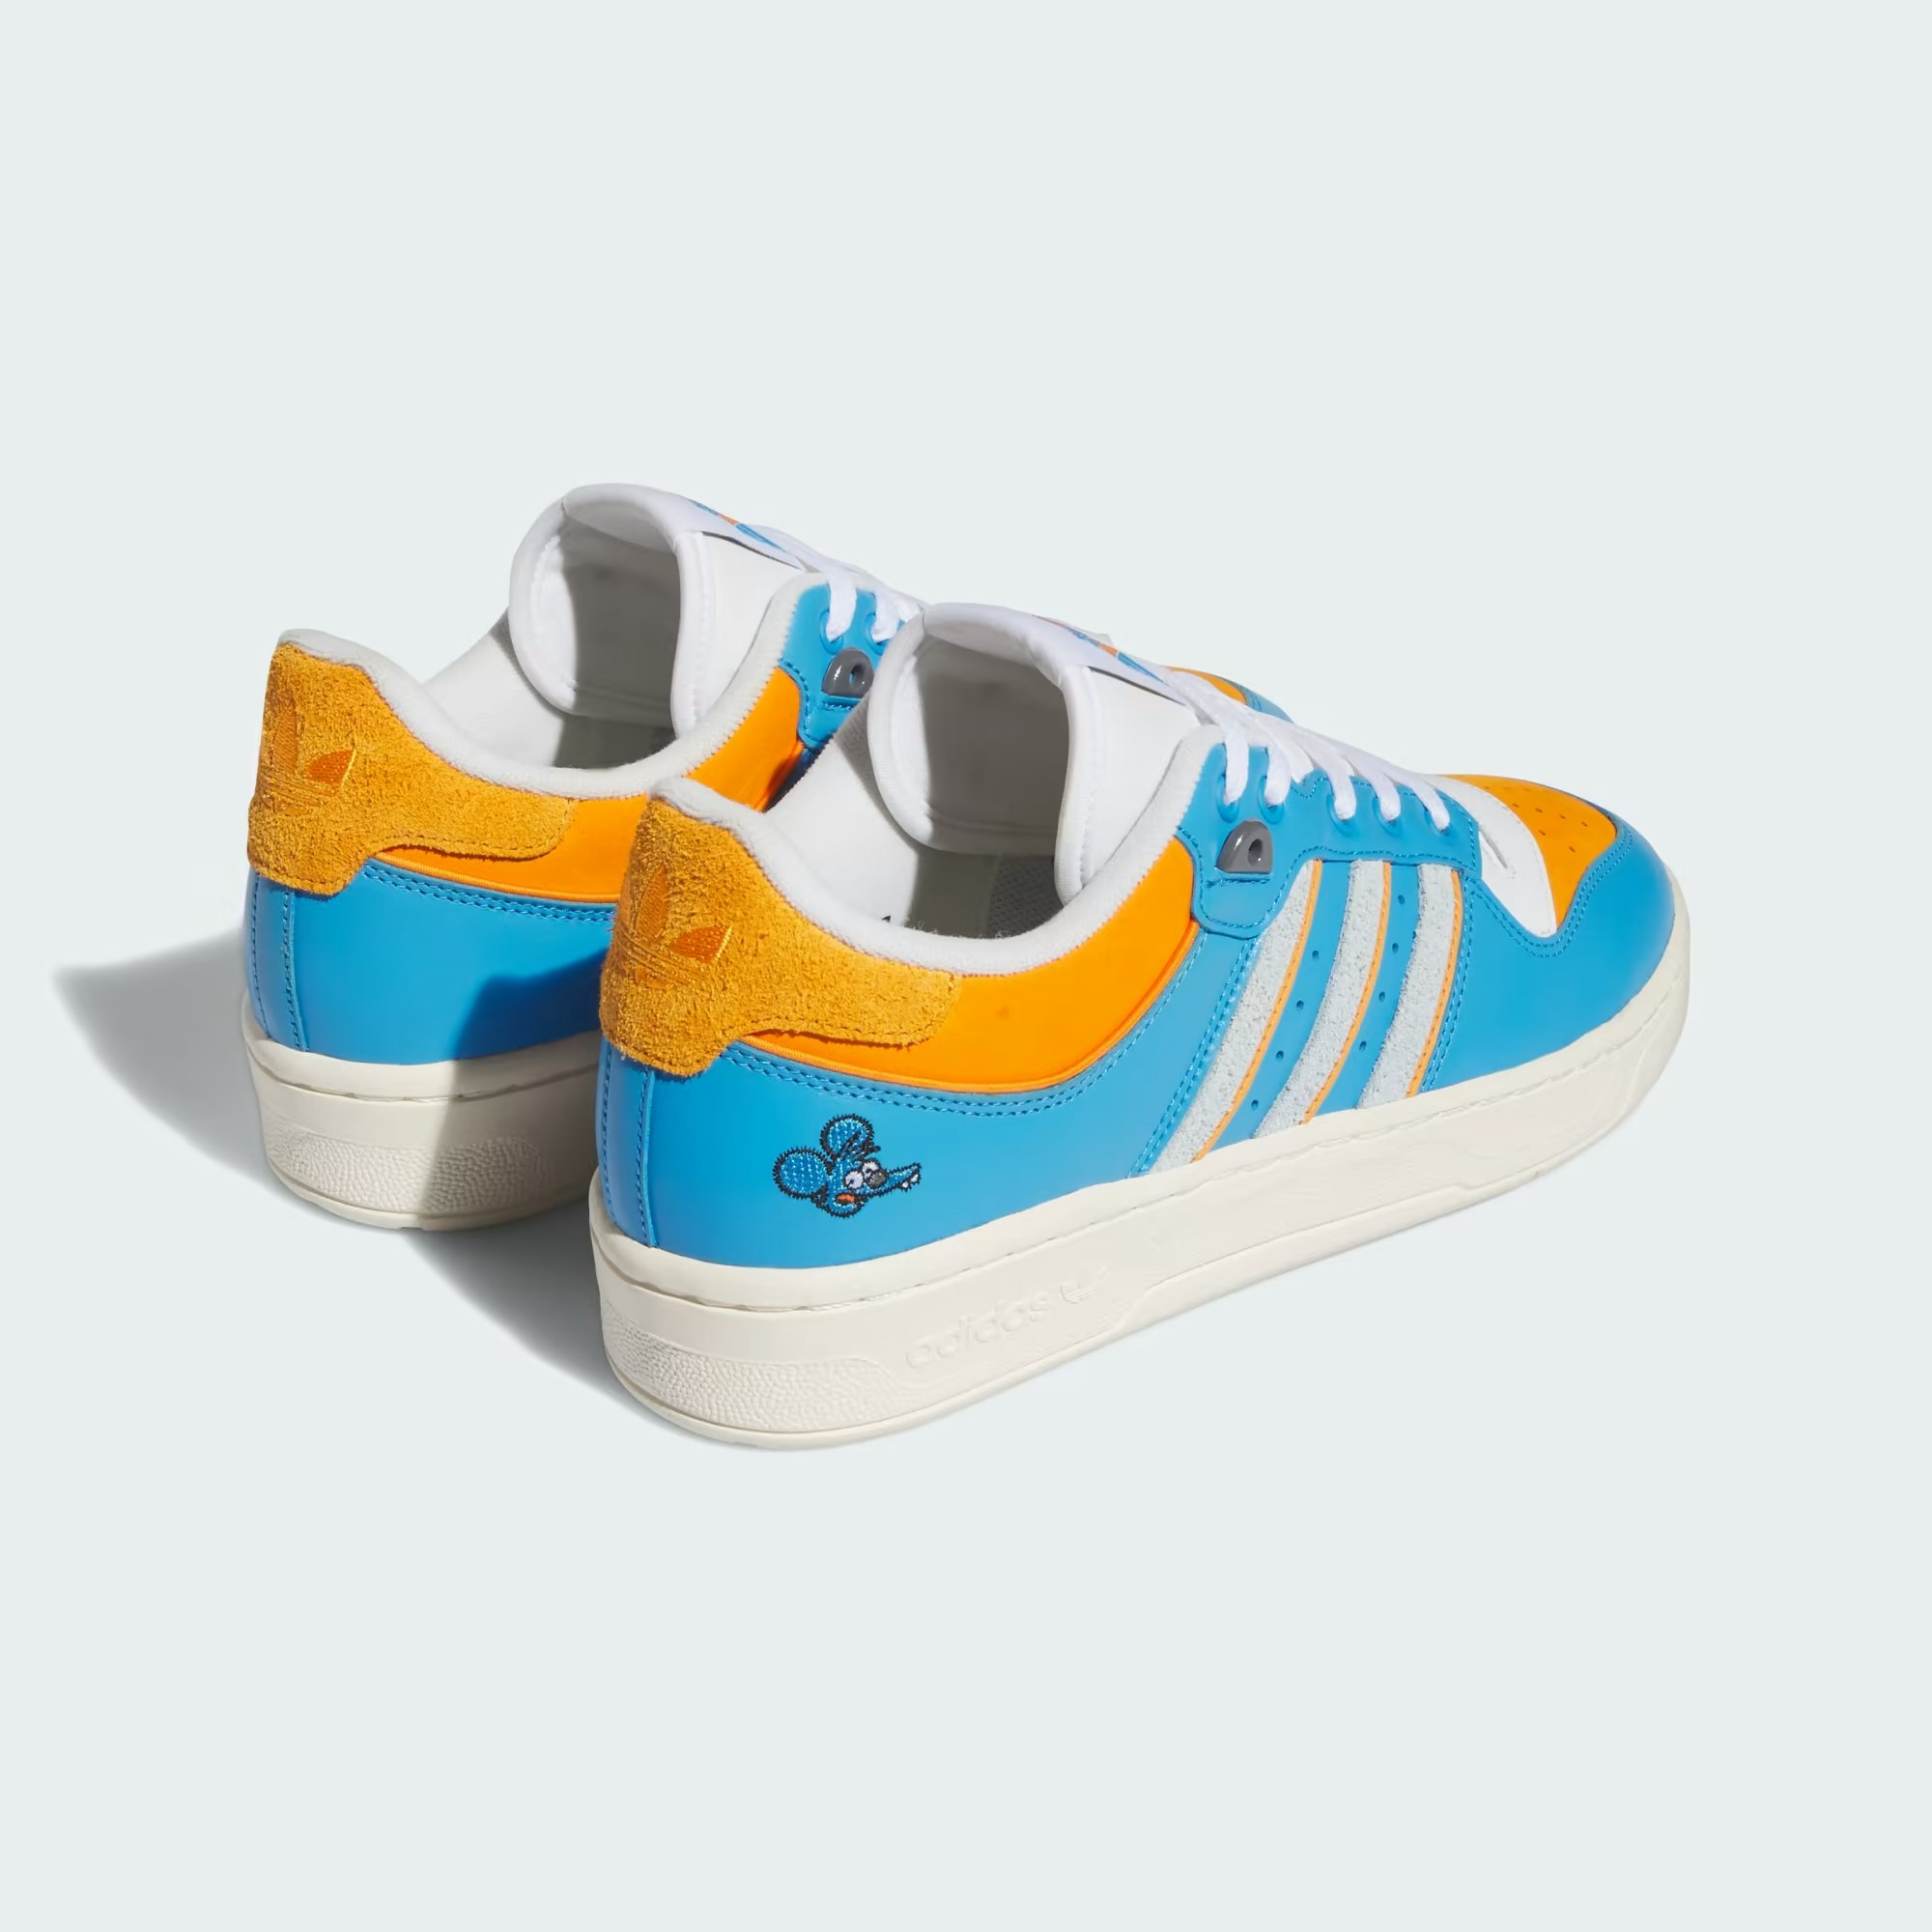 The Simpsons x adidas Rivalry Low "Itchy"